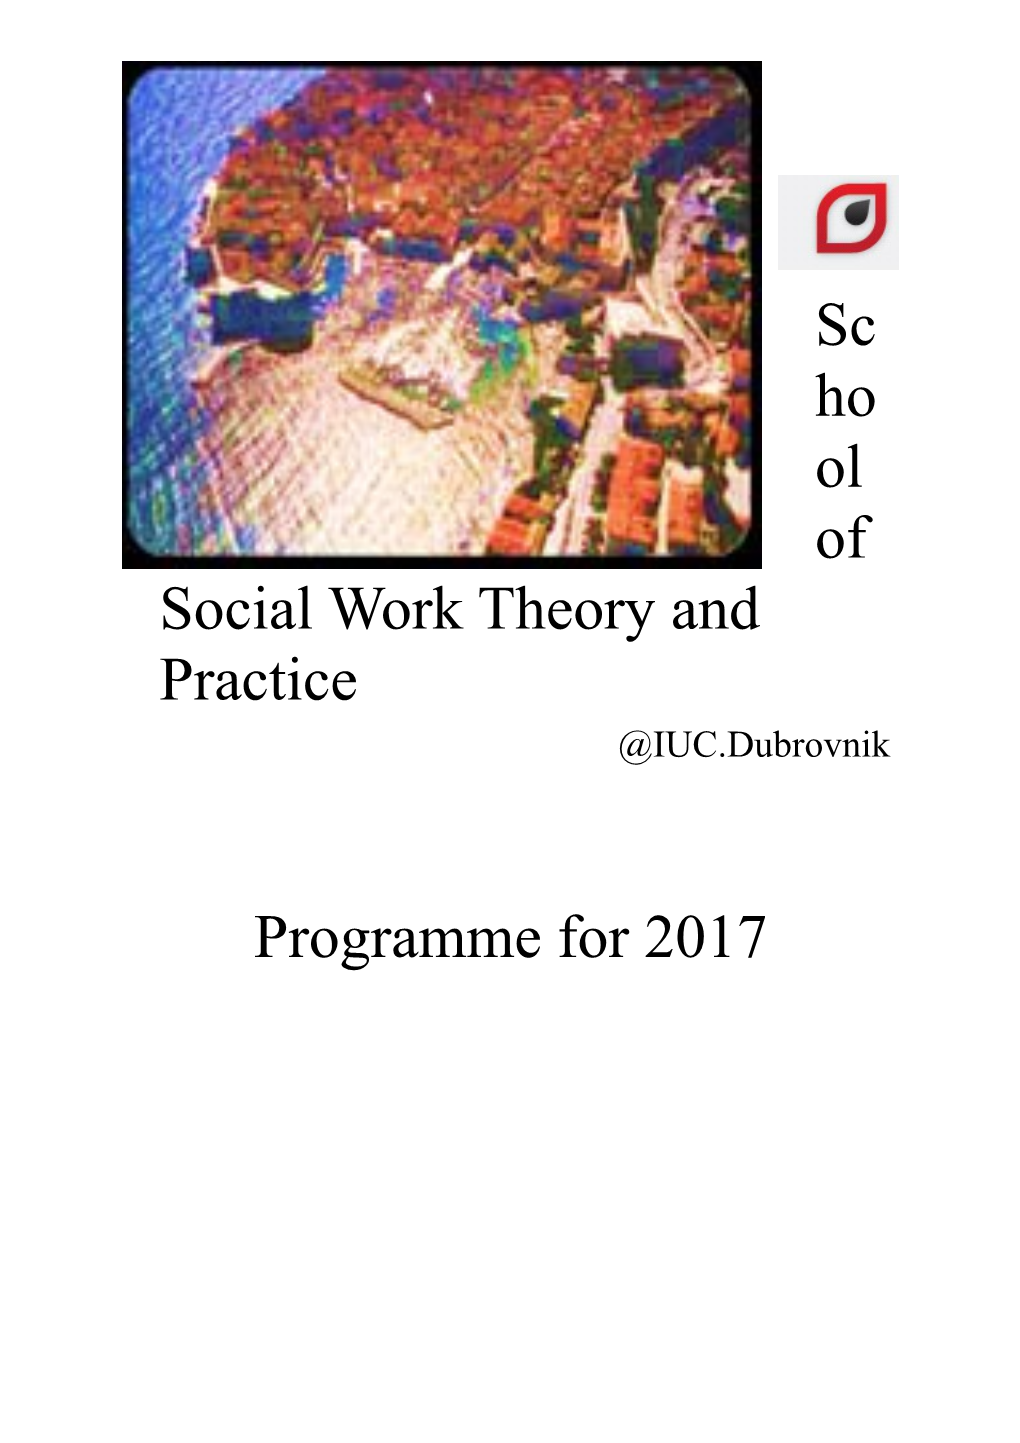 School for Social Work Theory and Ovnik